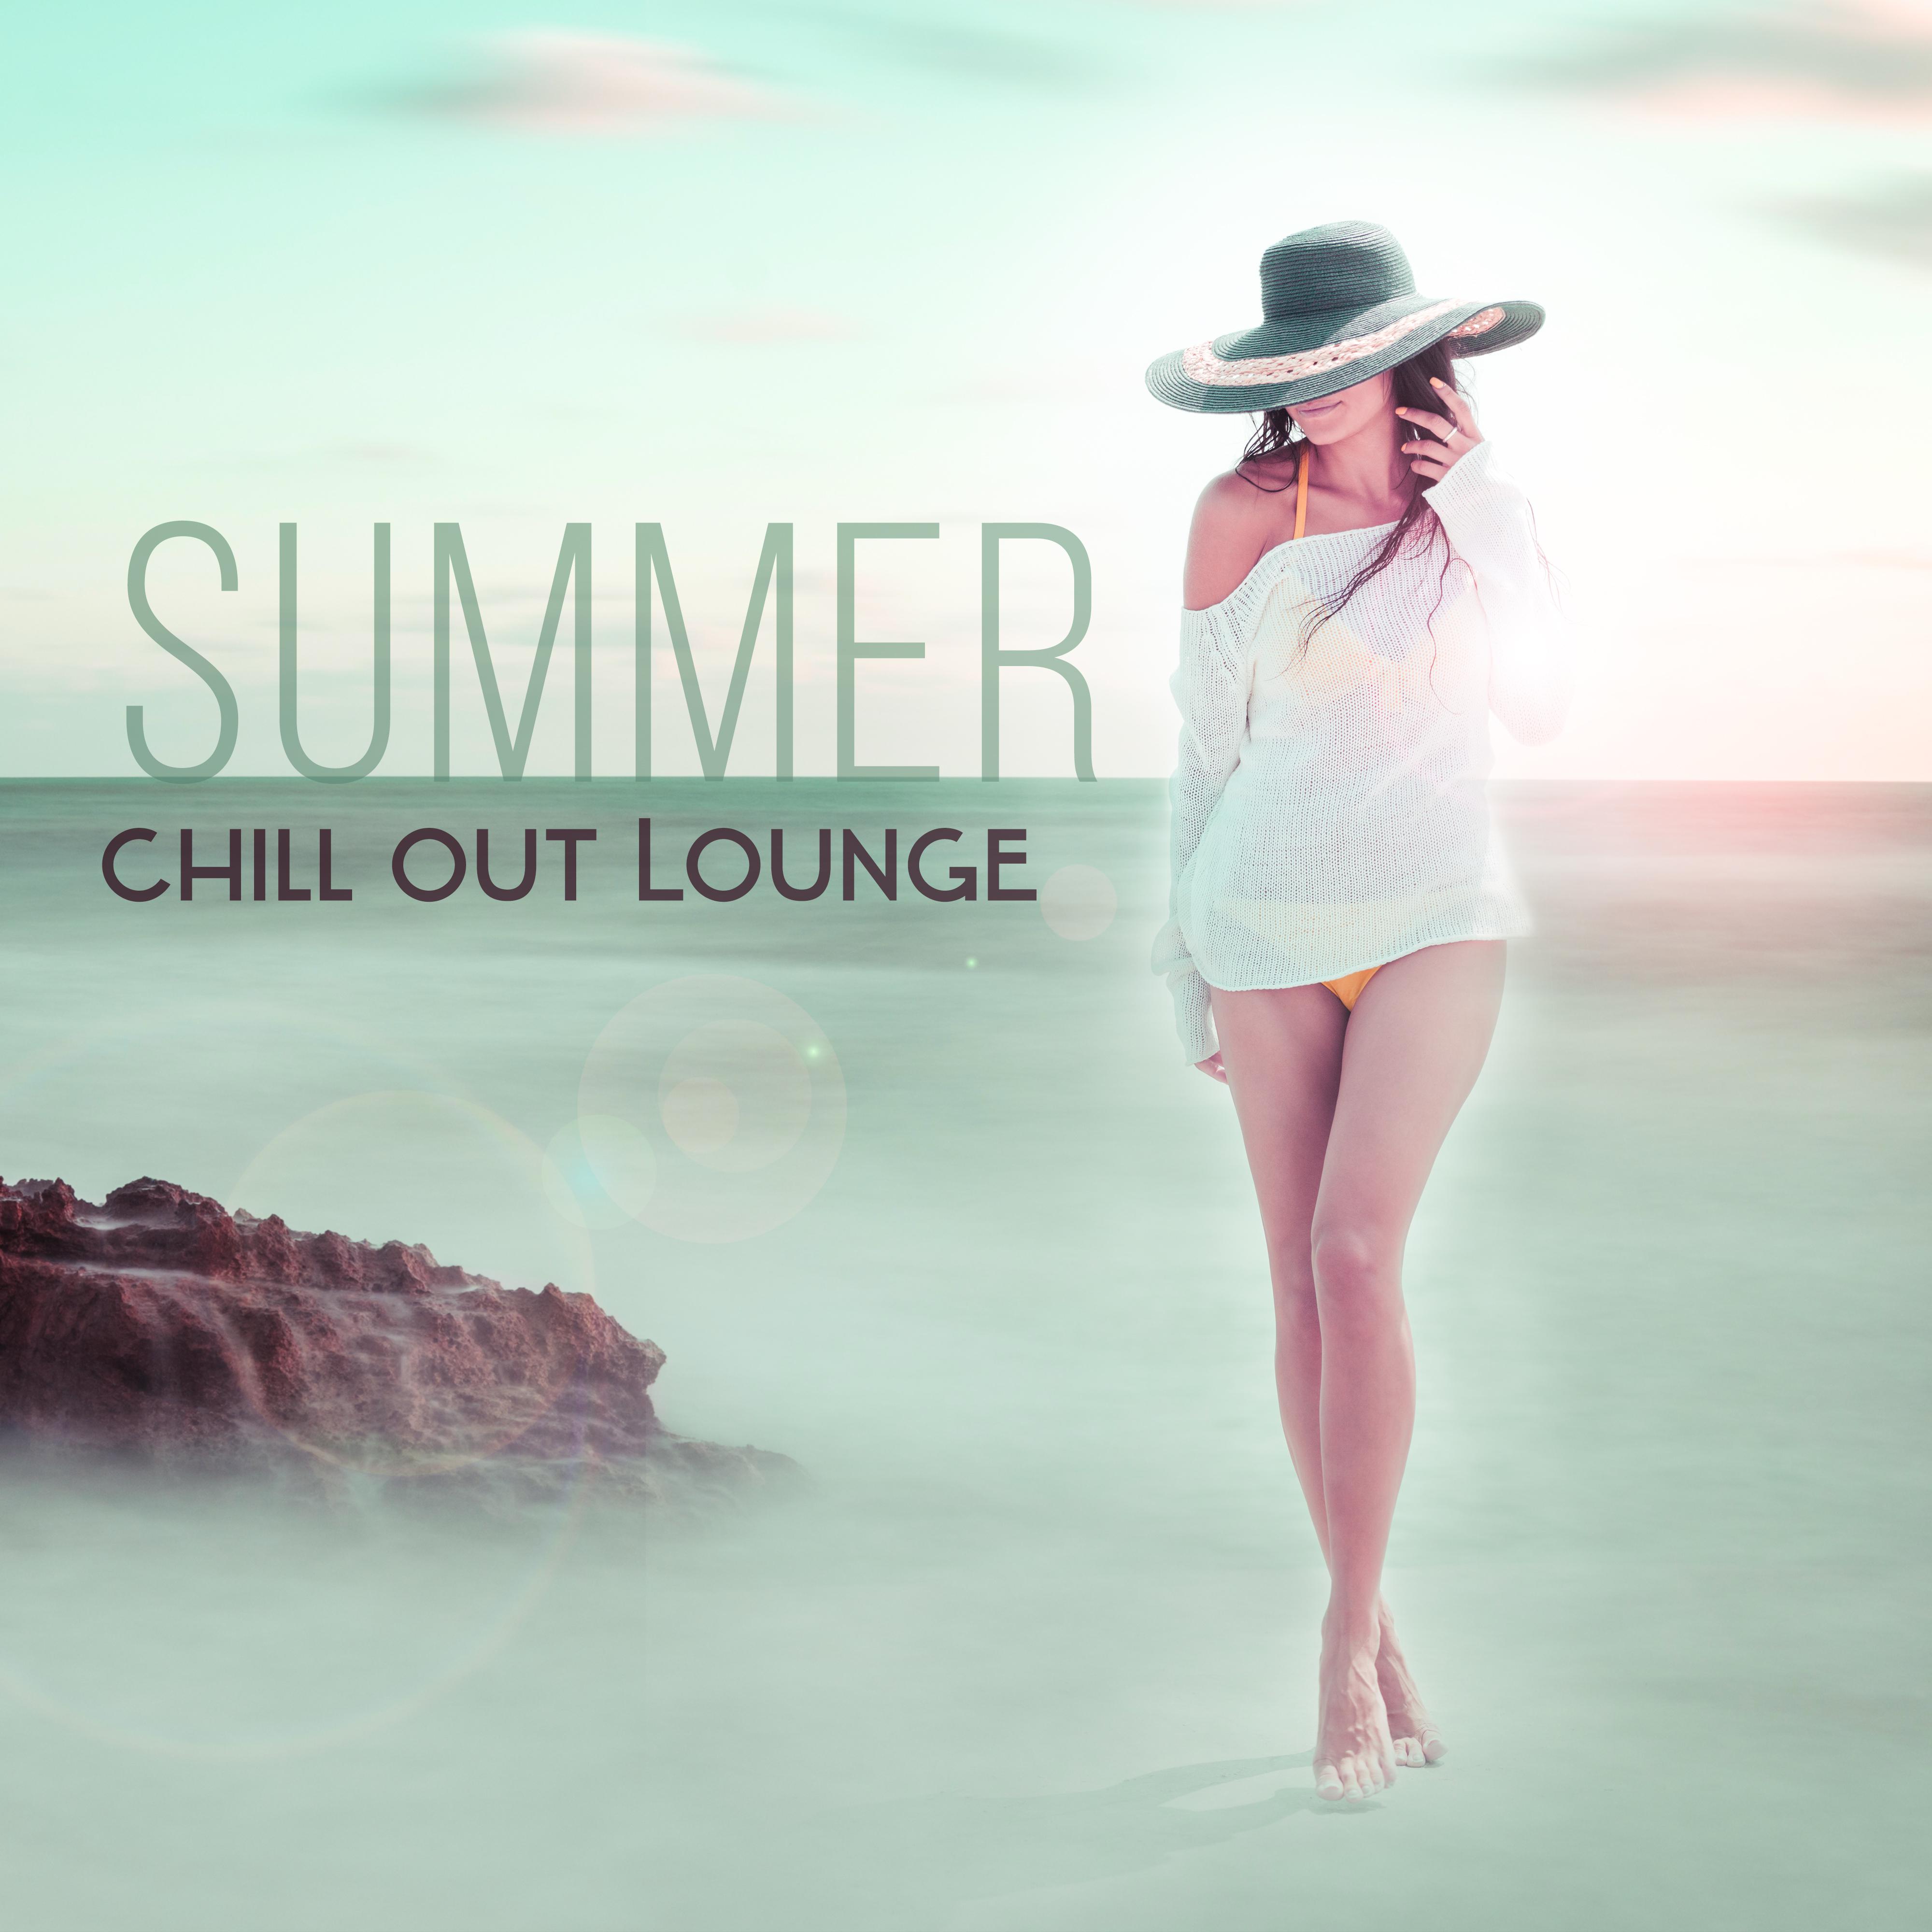 Summer Chill Out Lounge  Holiday Rest, Stress Relief, Cafe Drinking, Soft Music, Sounds to Relax